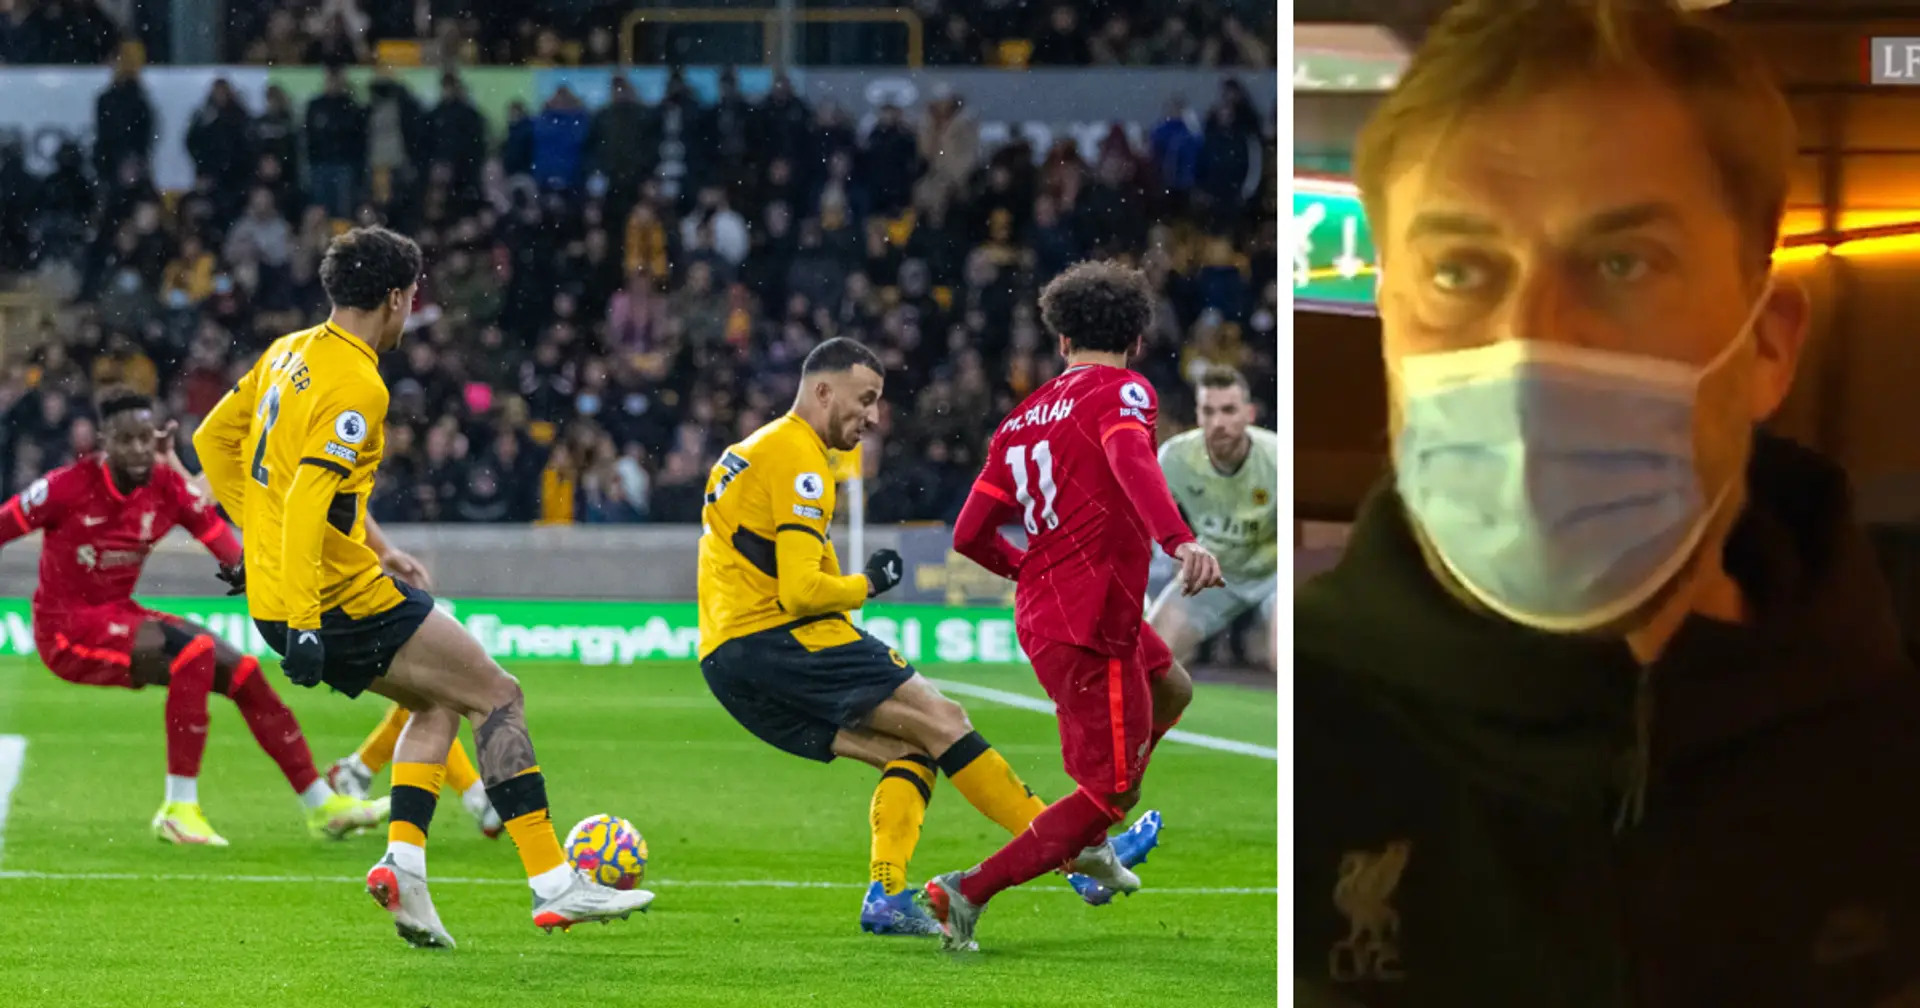 Rating Liverpool display in Wolves win based on 4 key factors